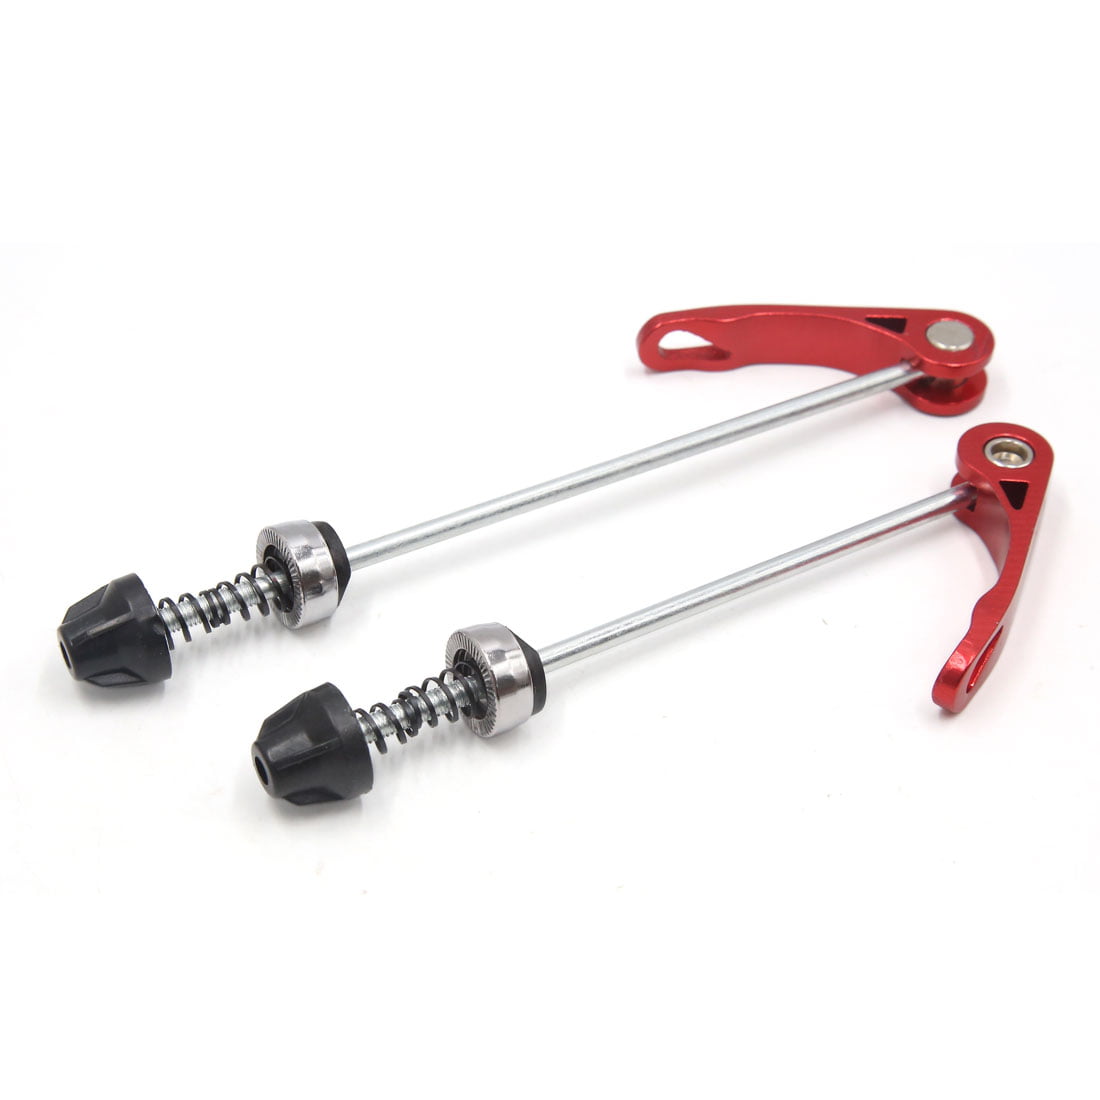 Parts Quick Release Skewer 19cm 99g Outdoor Bike Lever Stainless Steel 